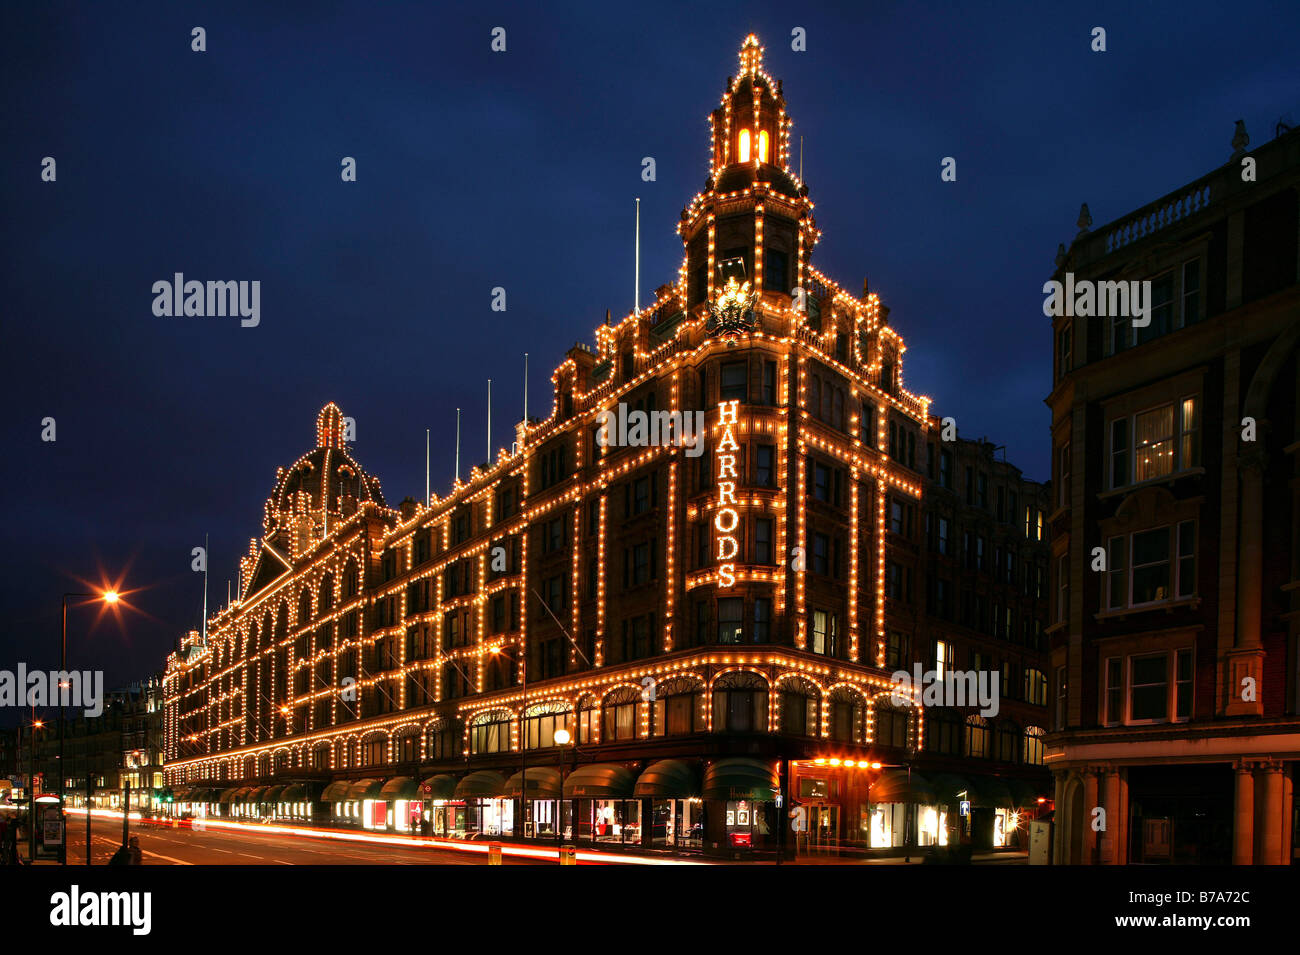 Harrods department store at night, London, England, Great Britain, Europe Stock Photo